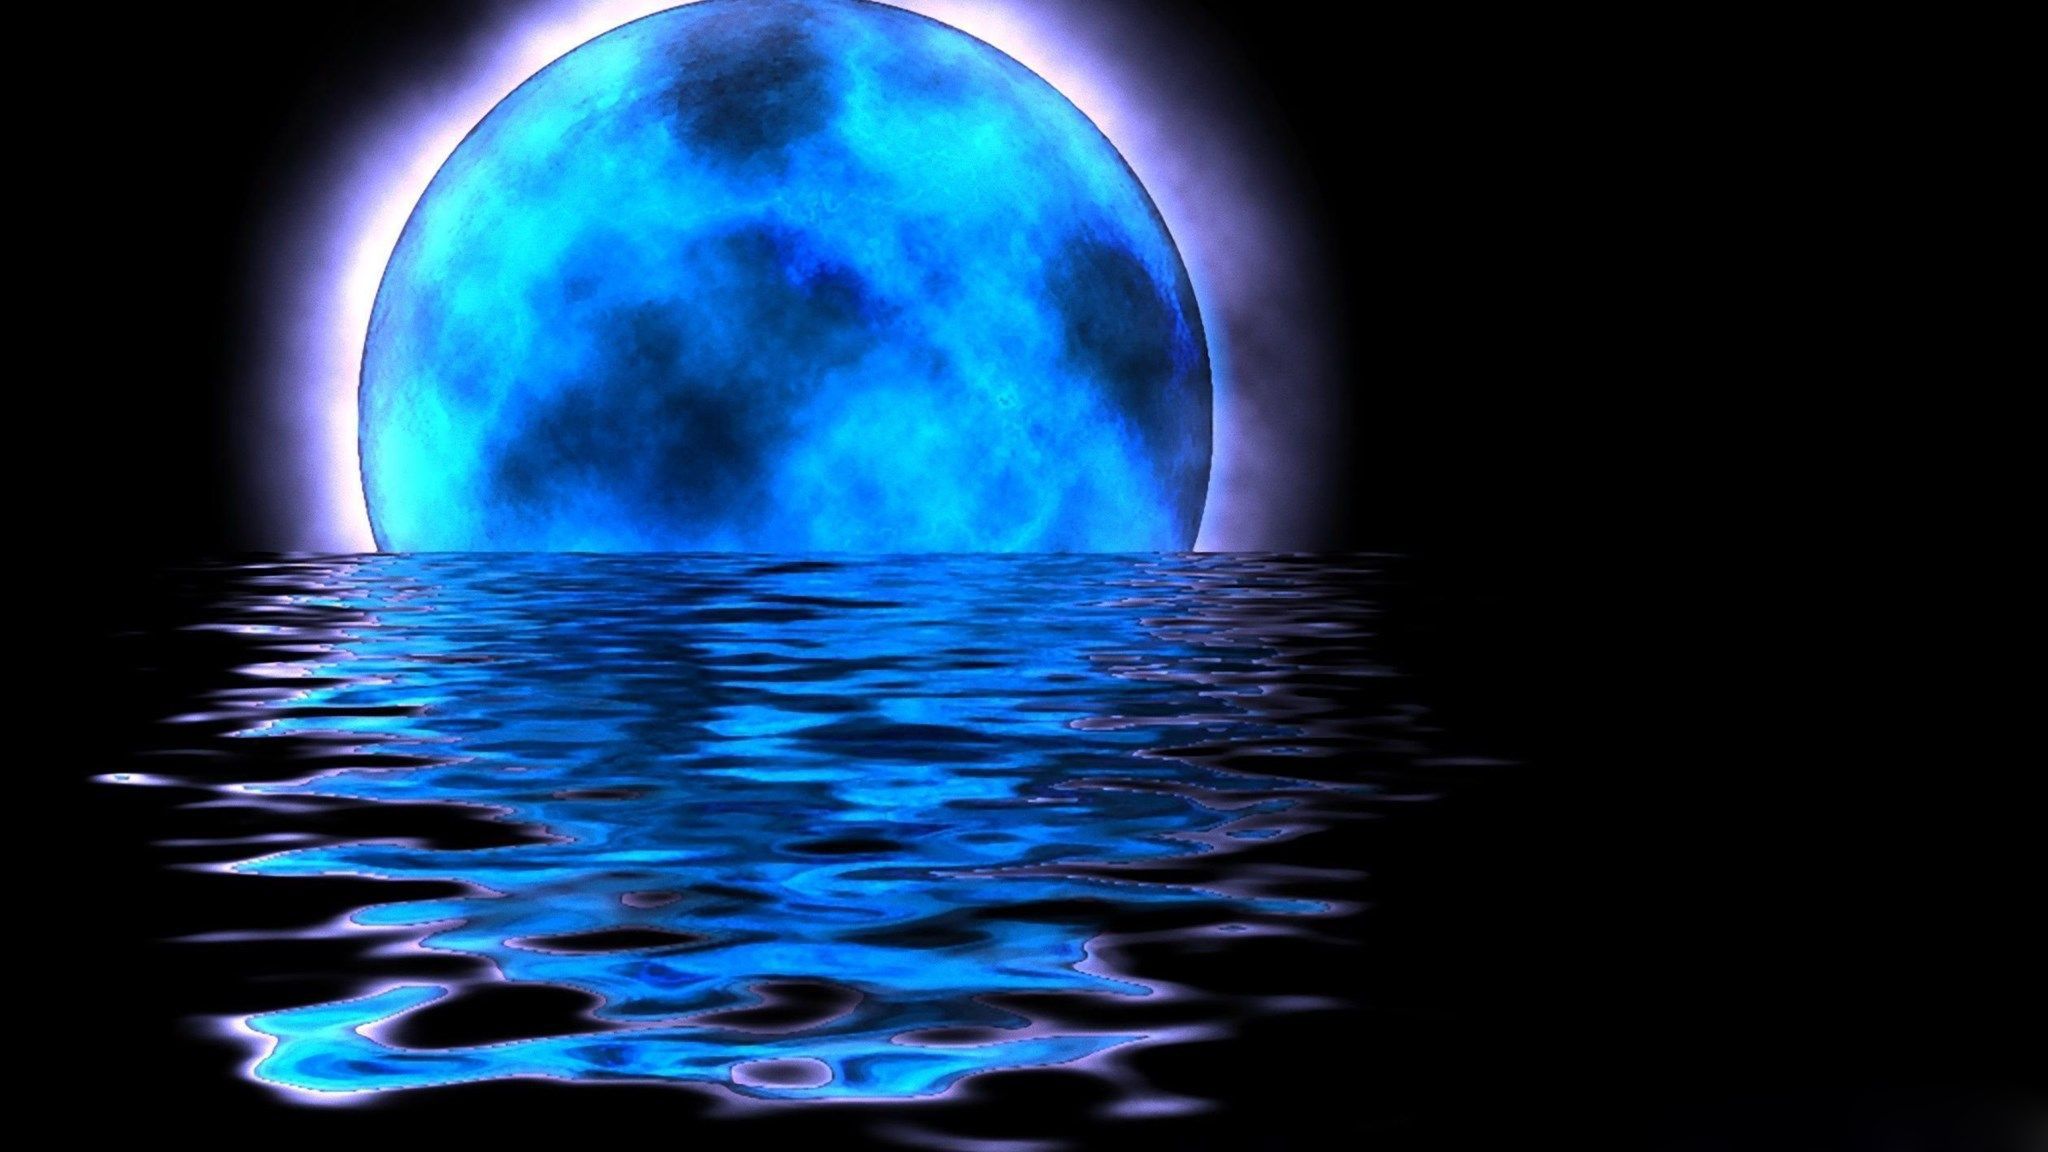 The moon is reflected in the water - Dark blue